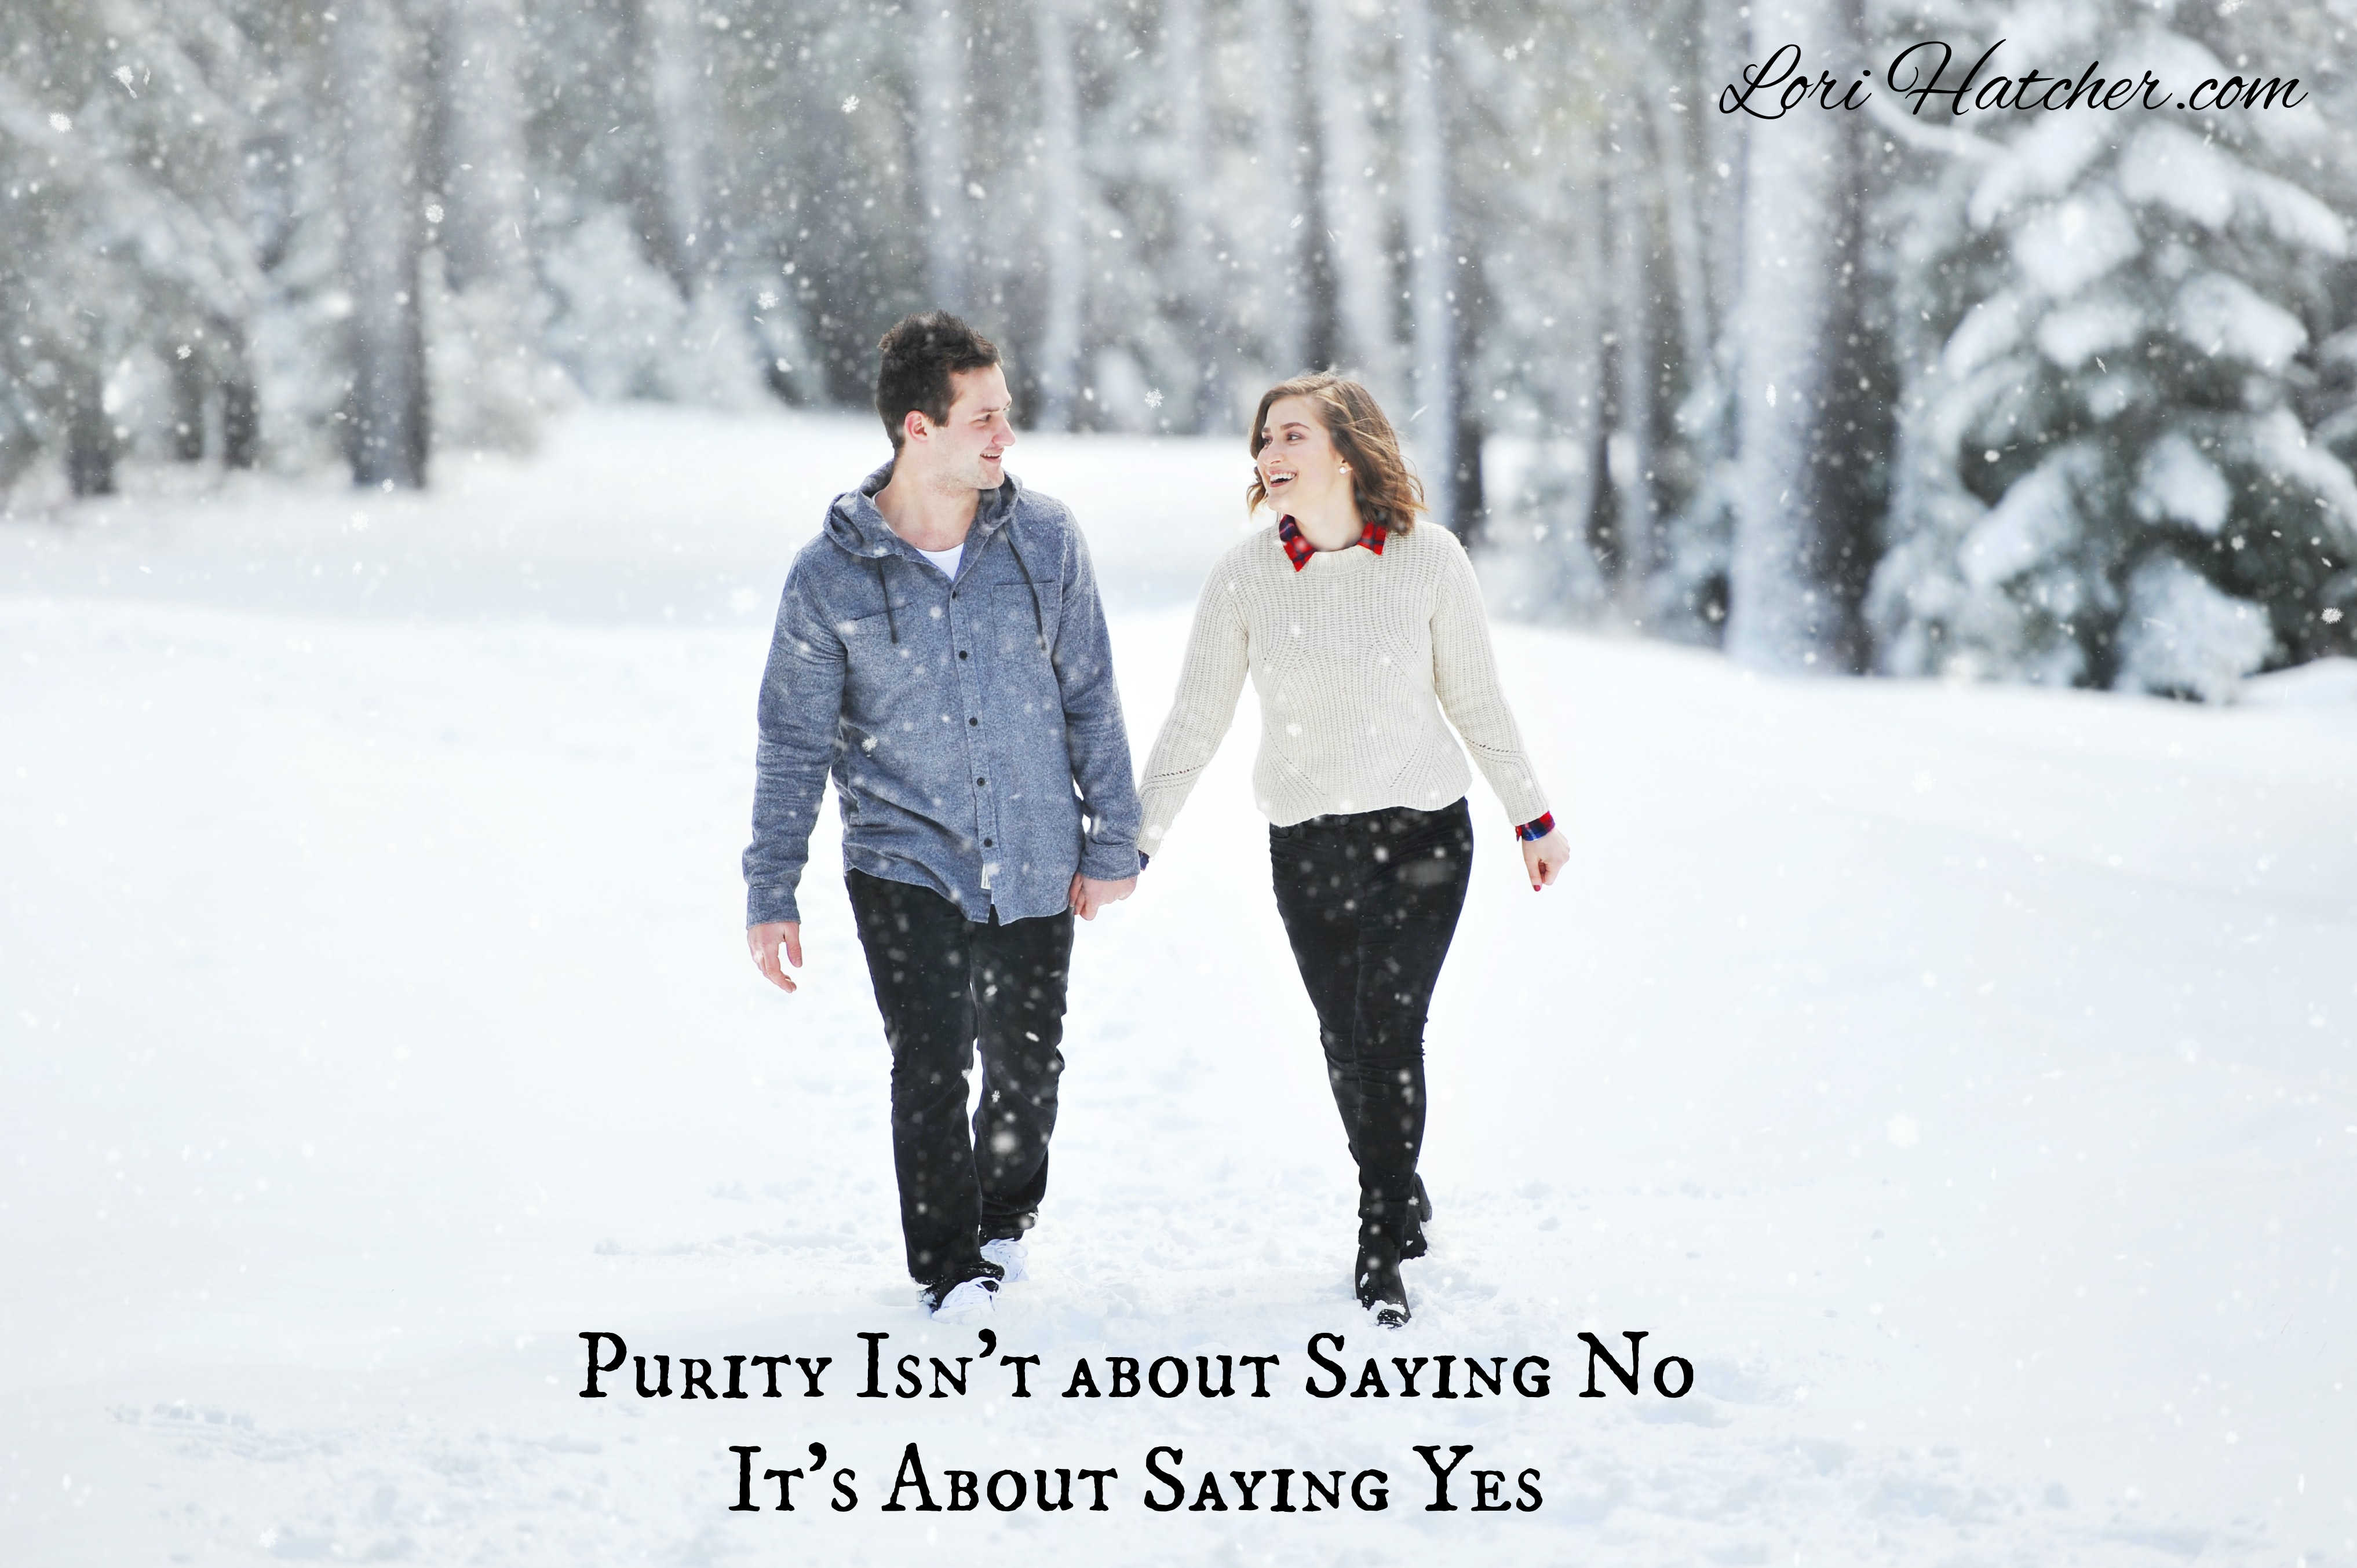 Purity Isn't About Saying No